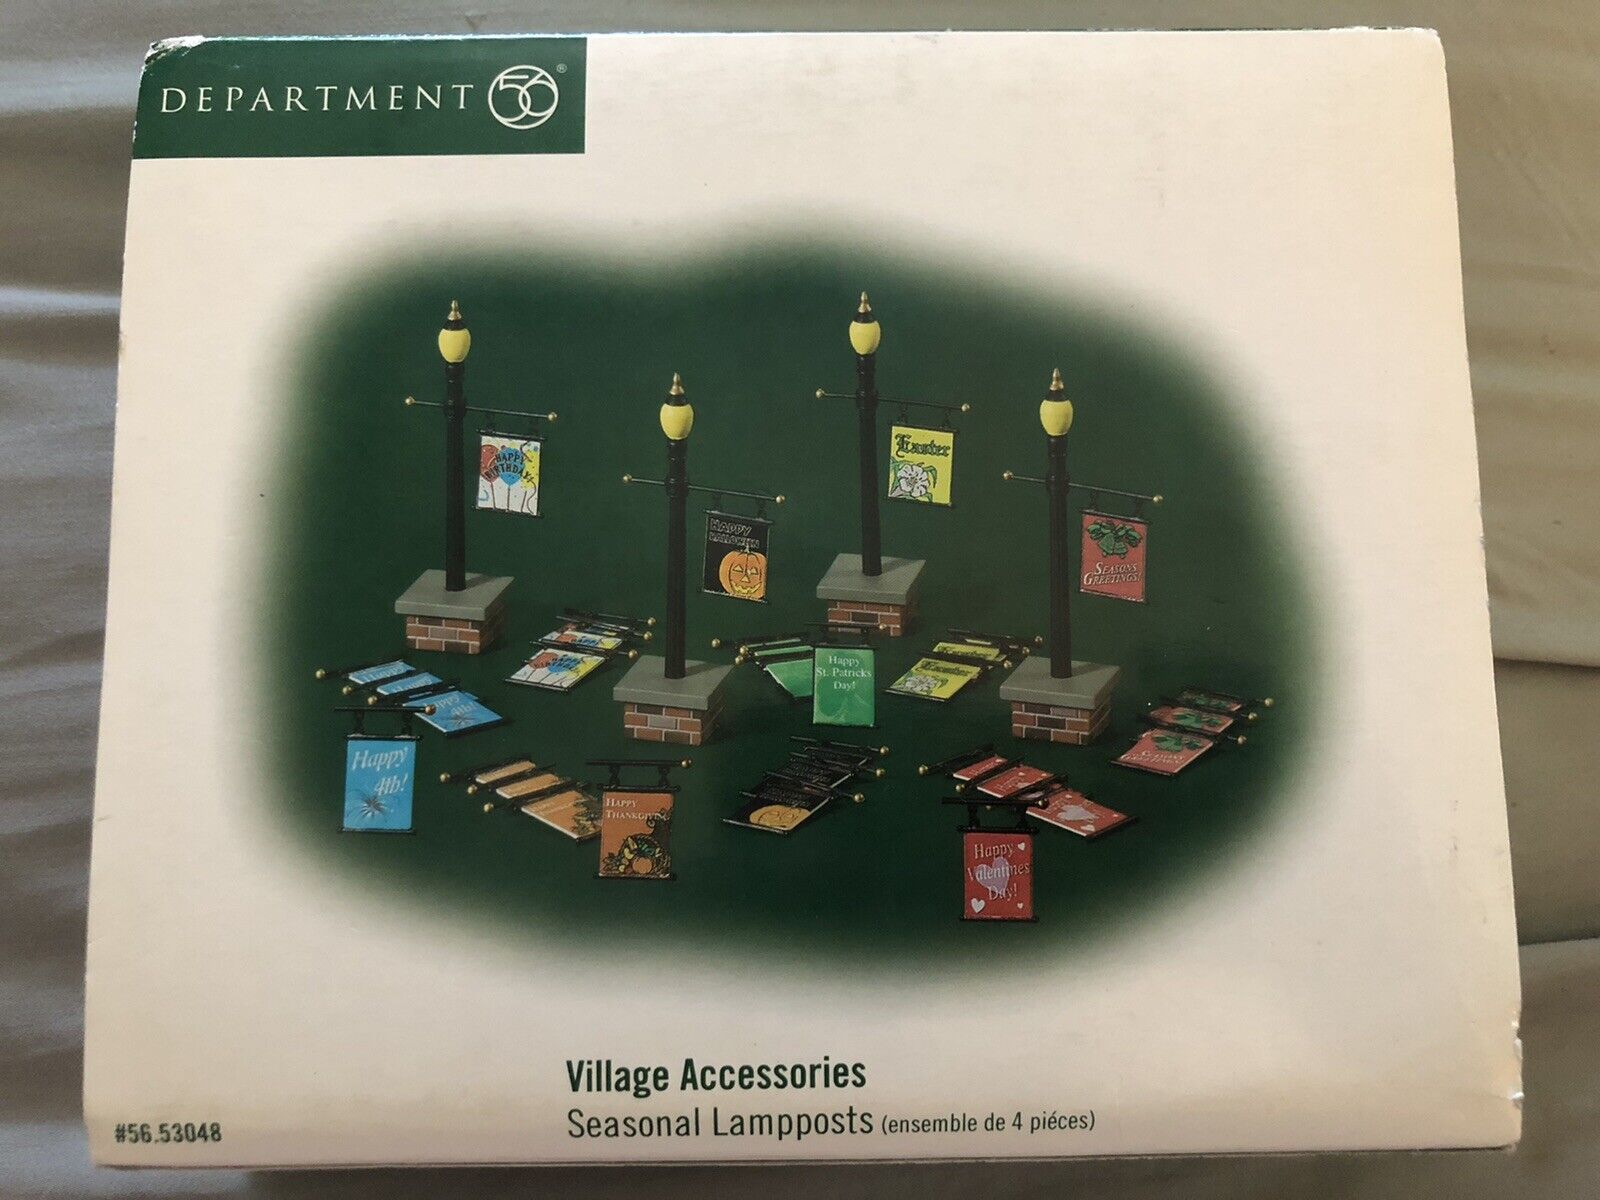 NEW Dept 56 Seasonal Lampposts with Banners RETIRED 53048 Village Accessories